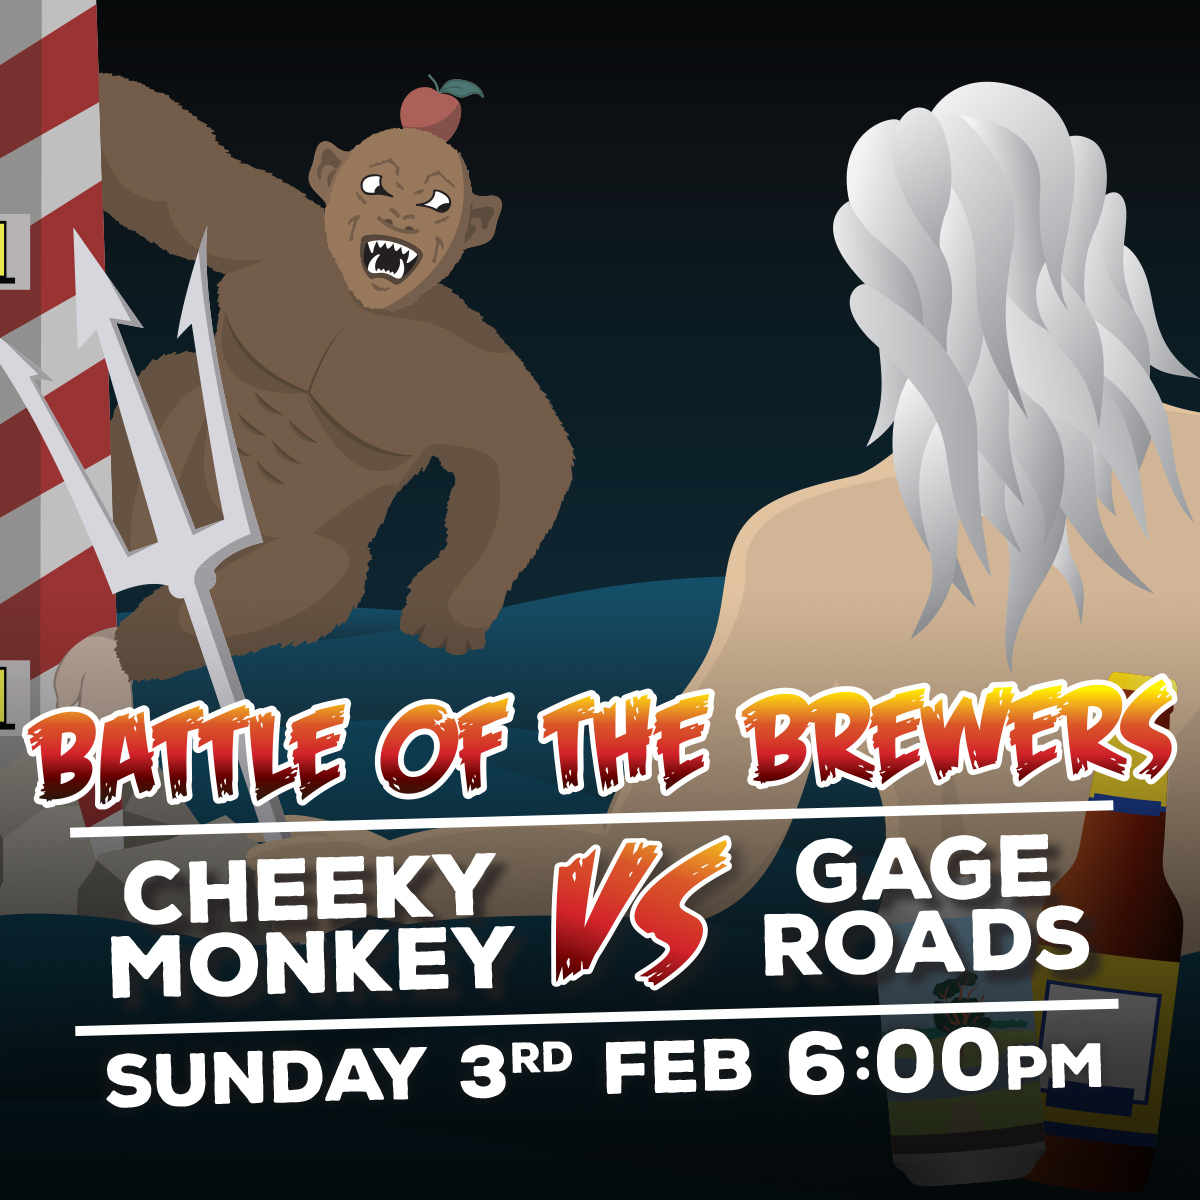 event image for the battle of the brewers